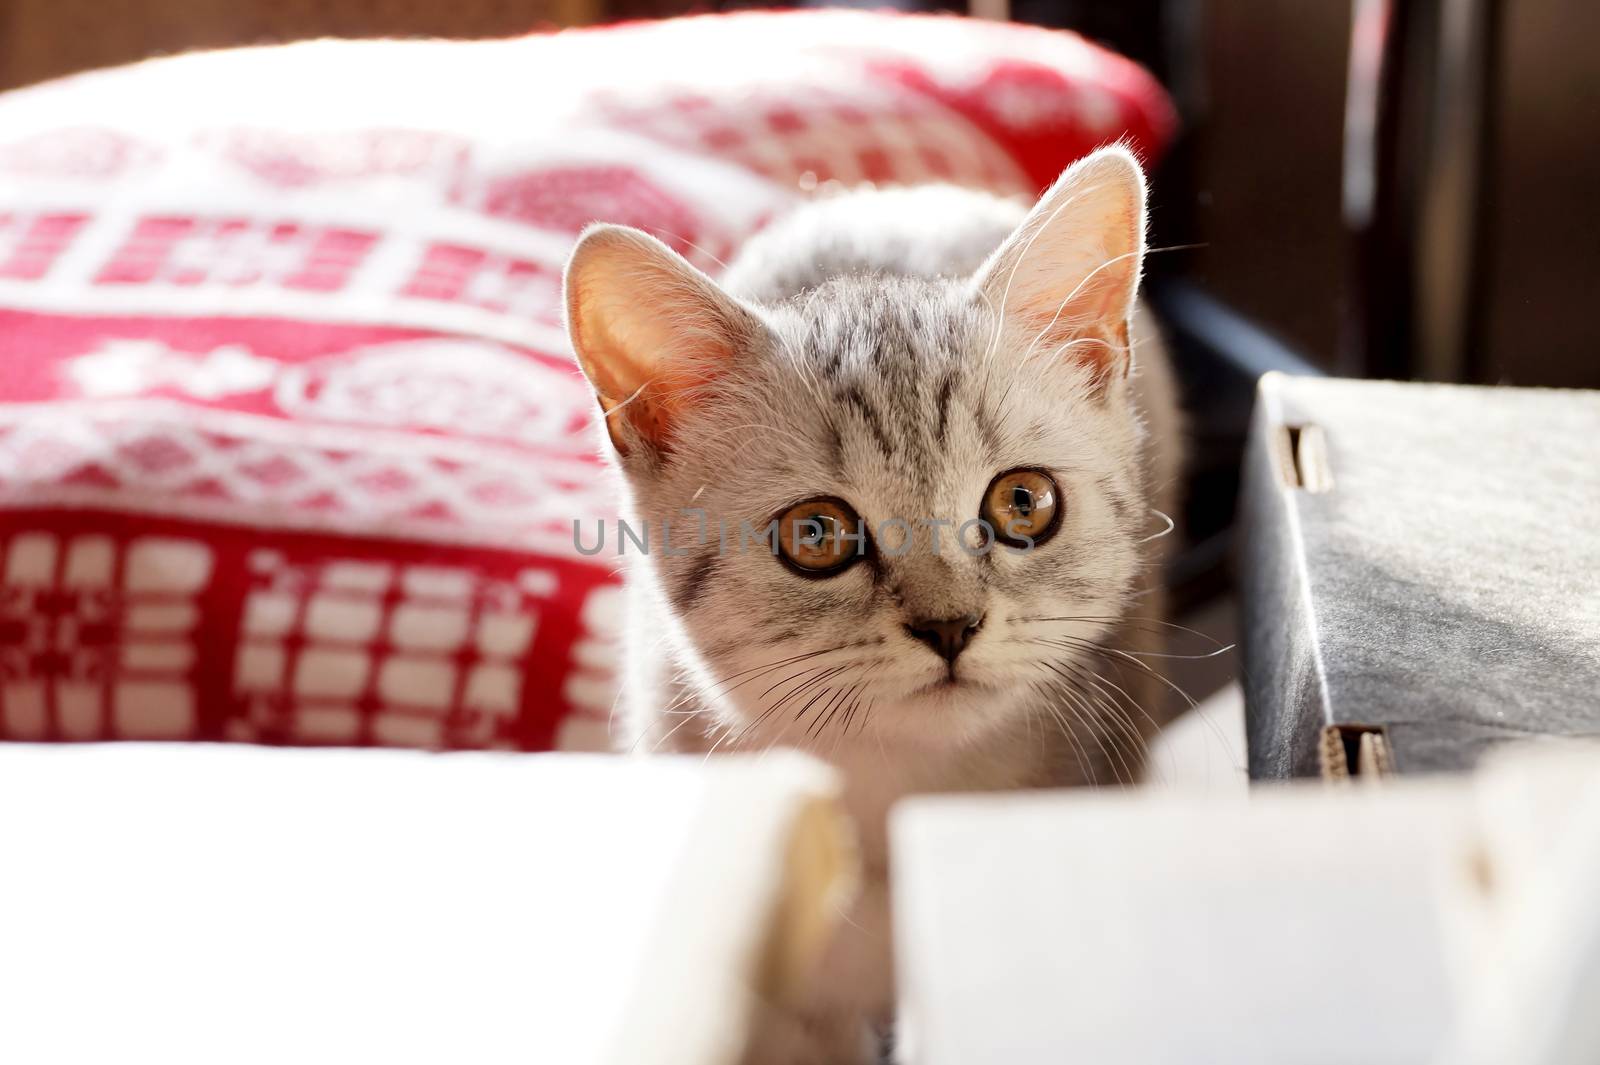 Kitten of the British breed of a gray color by Vadimdem